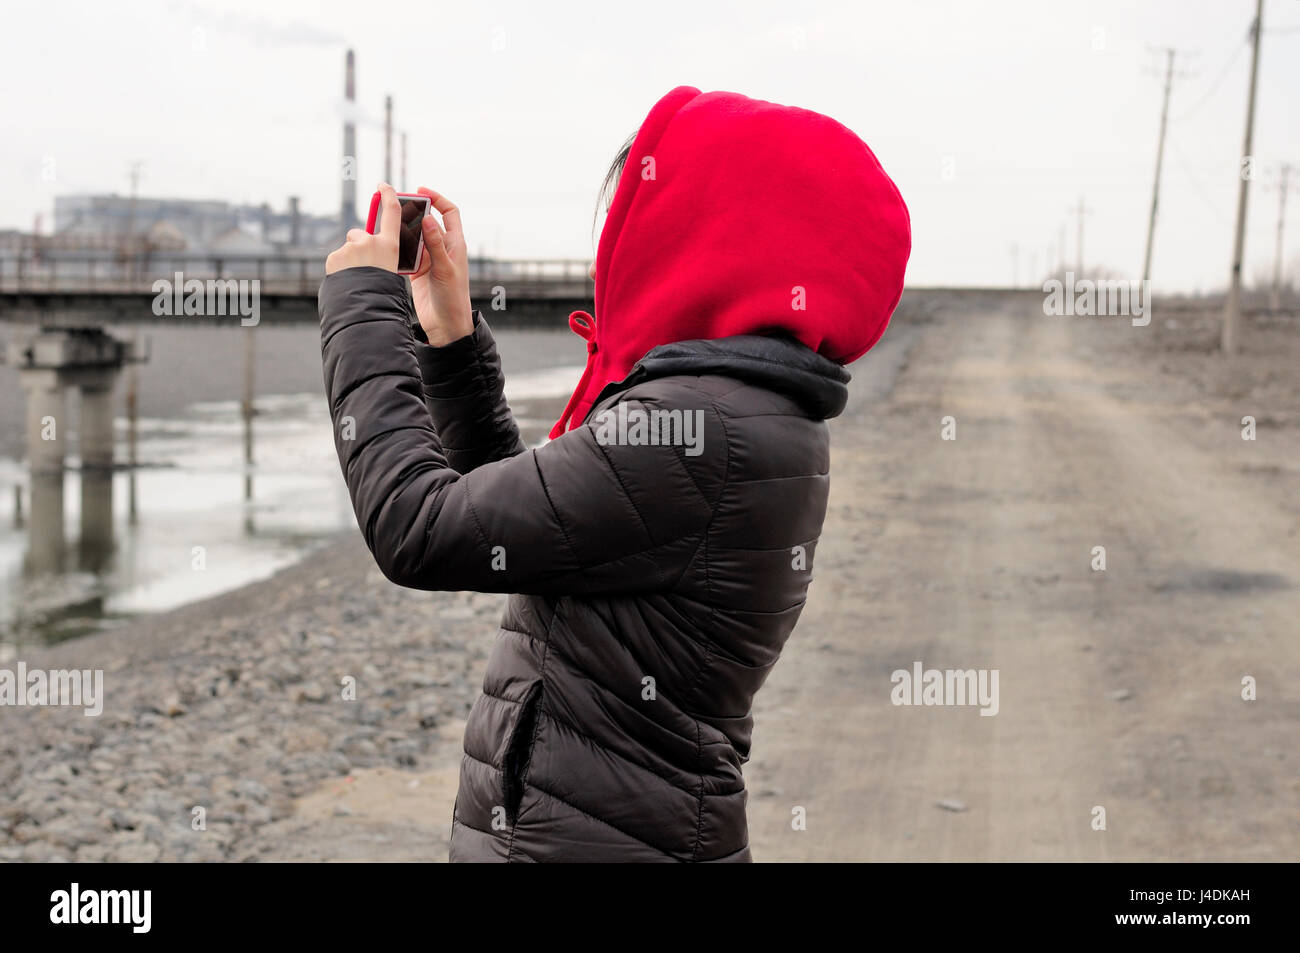 A chinese woman wearing a red hoodie taking pictures with a smart phone near a chinese ethanol production factory along a dirt road in the city of Zha Stock Photo